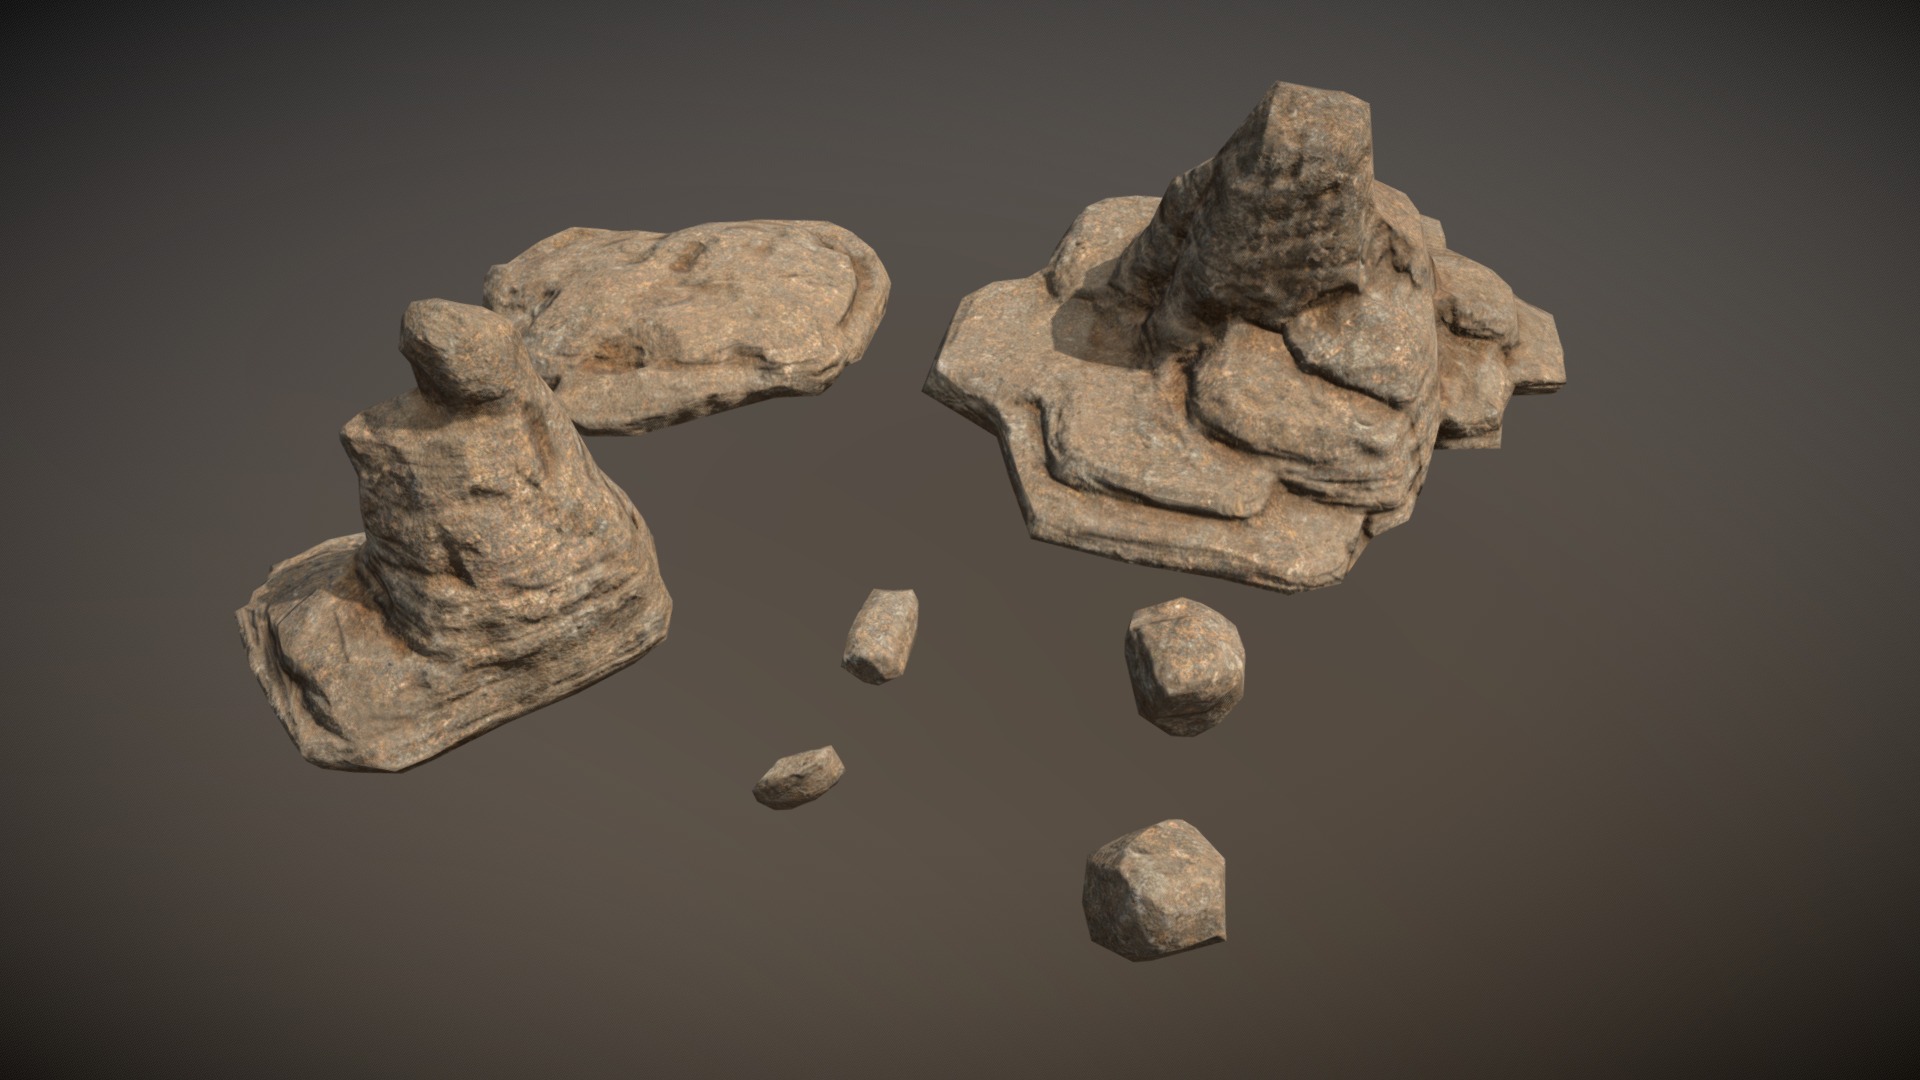 3D model Lowpoly sandstone Kit - This is a 3D model of the Lowpoly sandstone Kit. The 3D model is about a group of rocks.